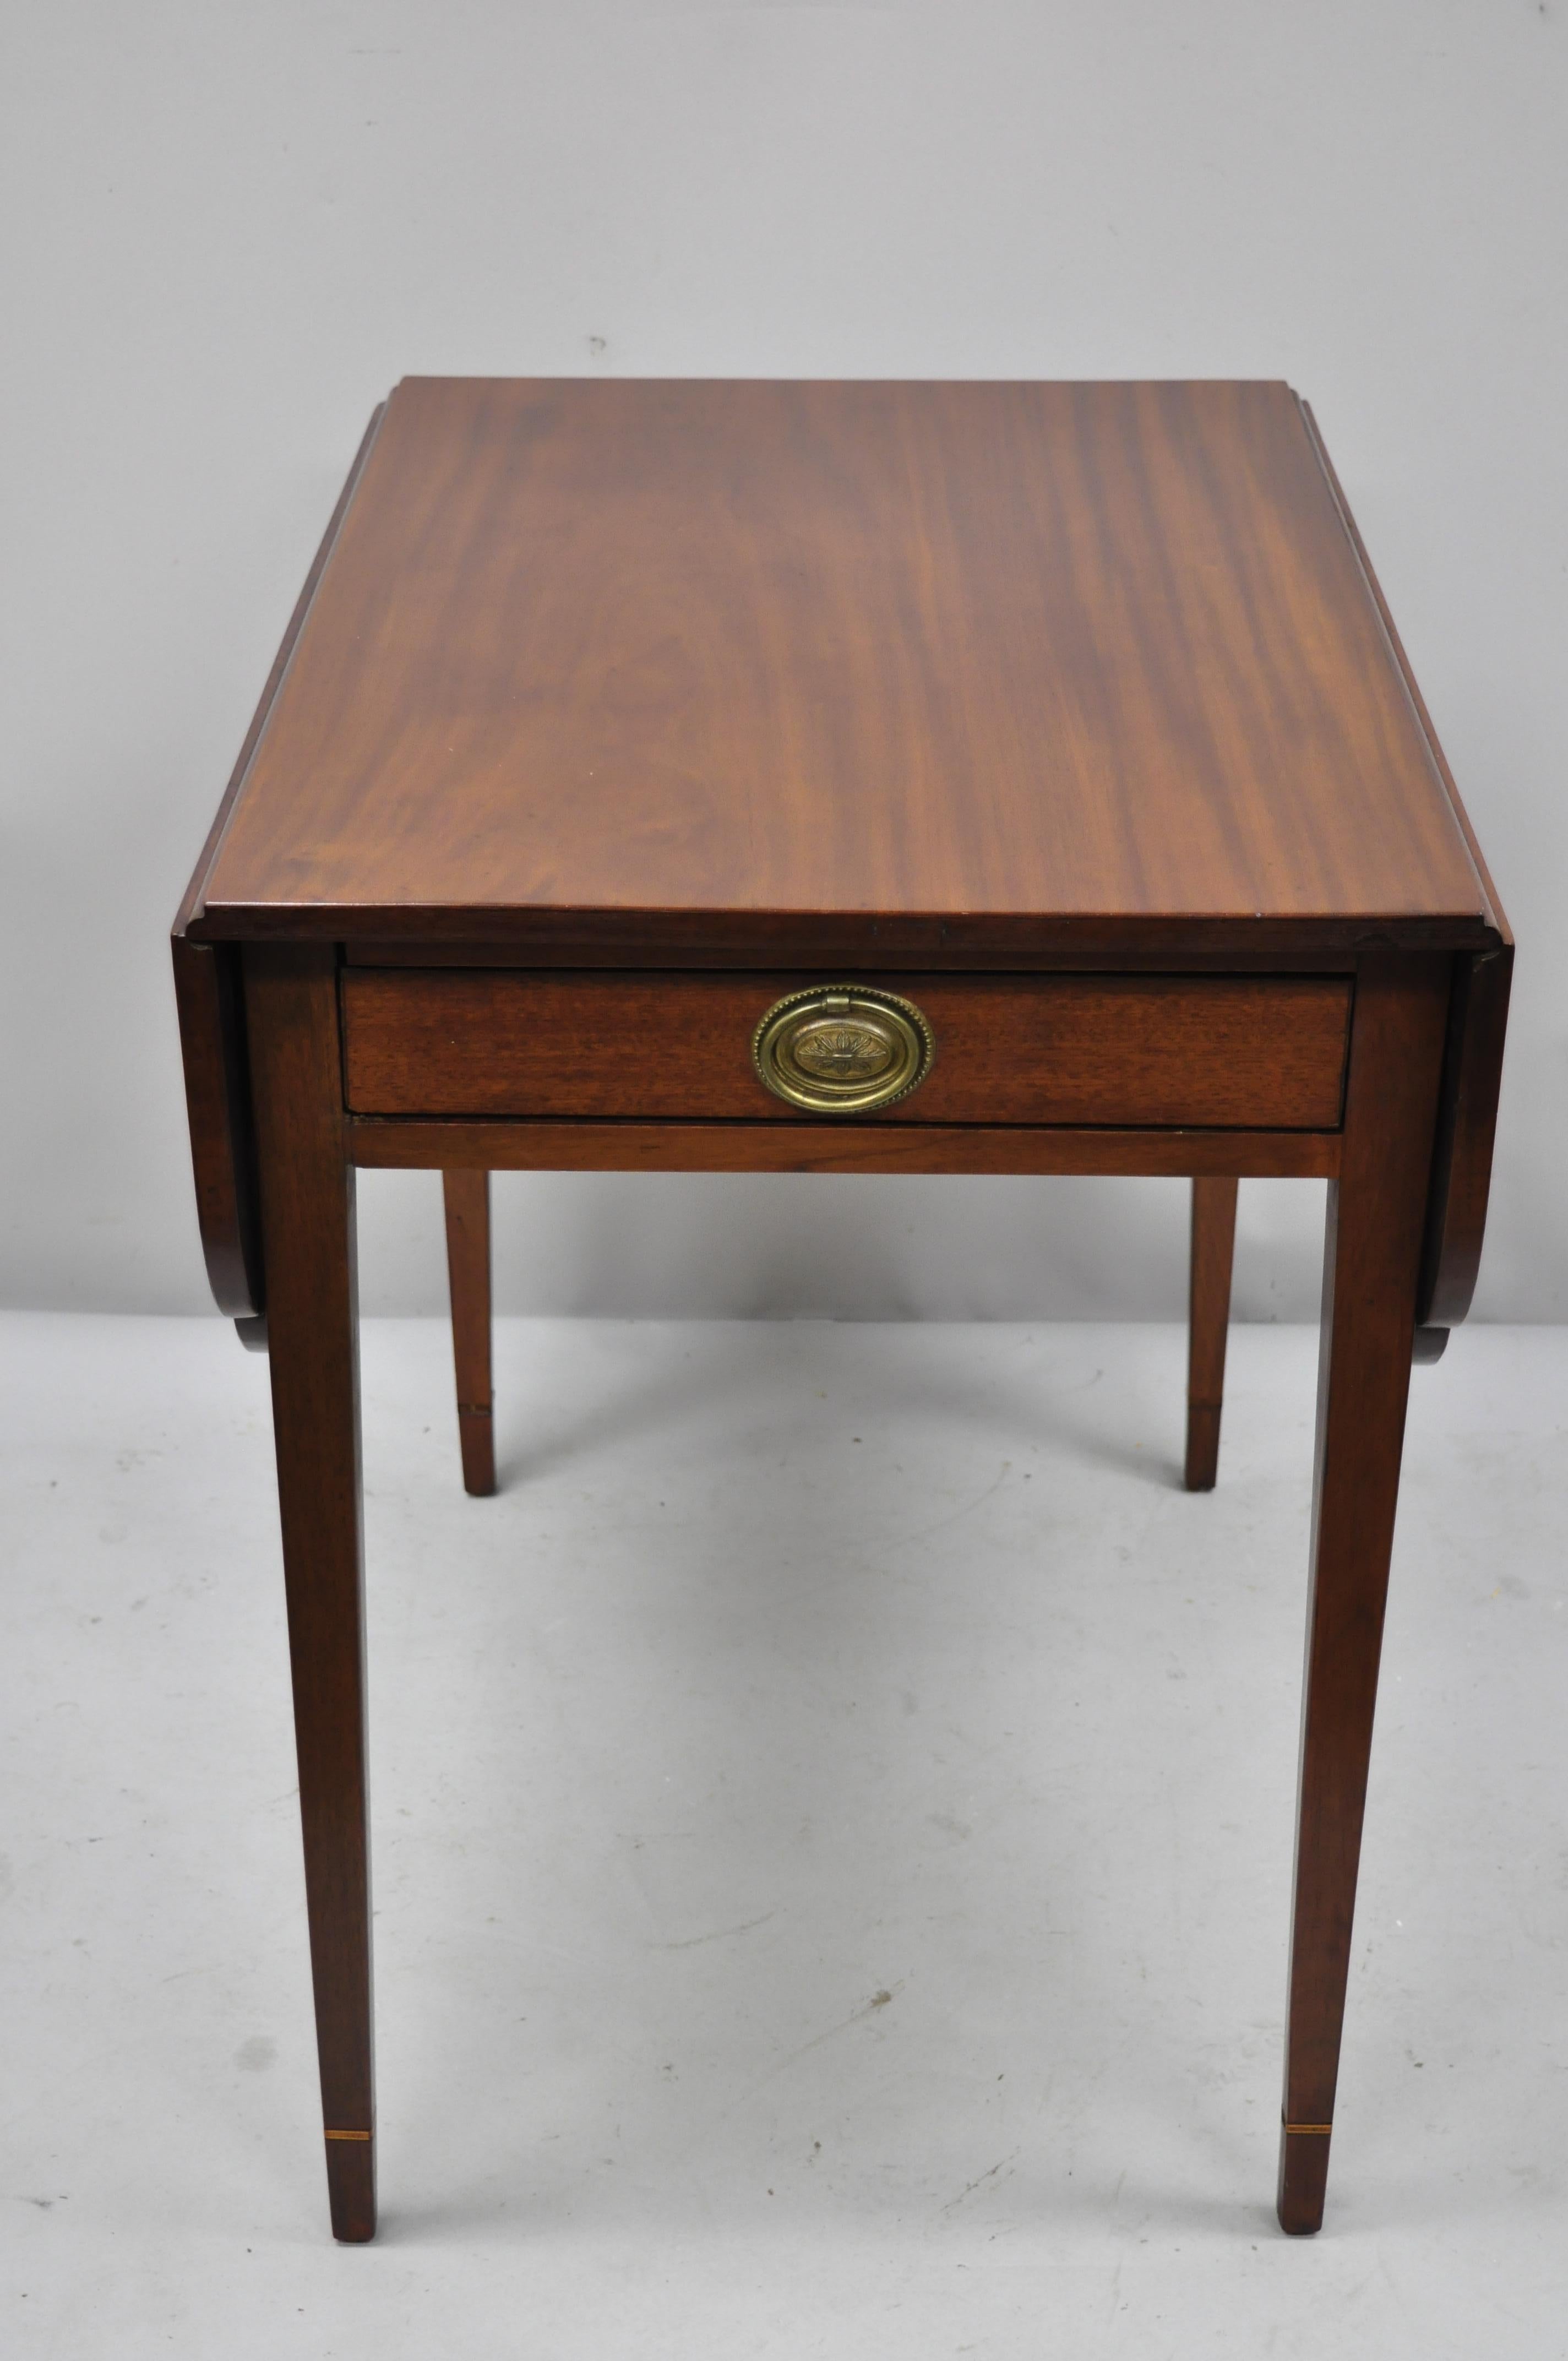 19th century antique mahogany Pembroke drop-leaf lamp side table with one drawer. Item features solid wood construction, beautiful wood grain, 1 dovetailed drawer, tapered legs, solid brass hardware, nice inlay, very nice antique item, quality